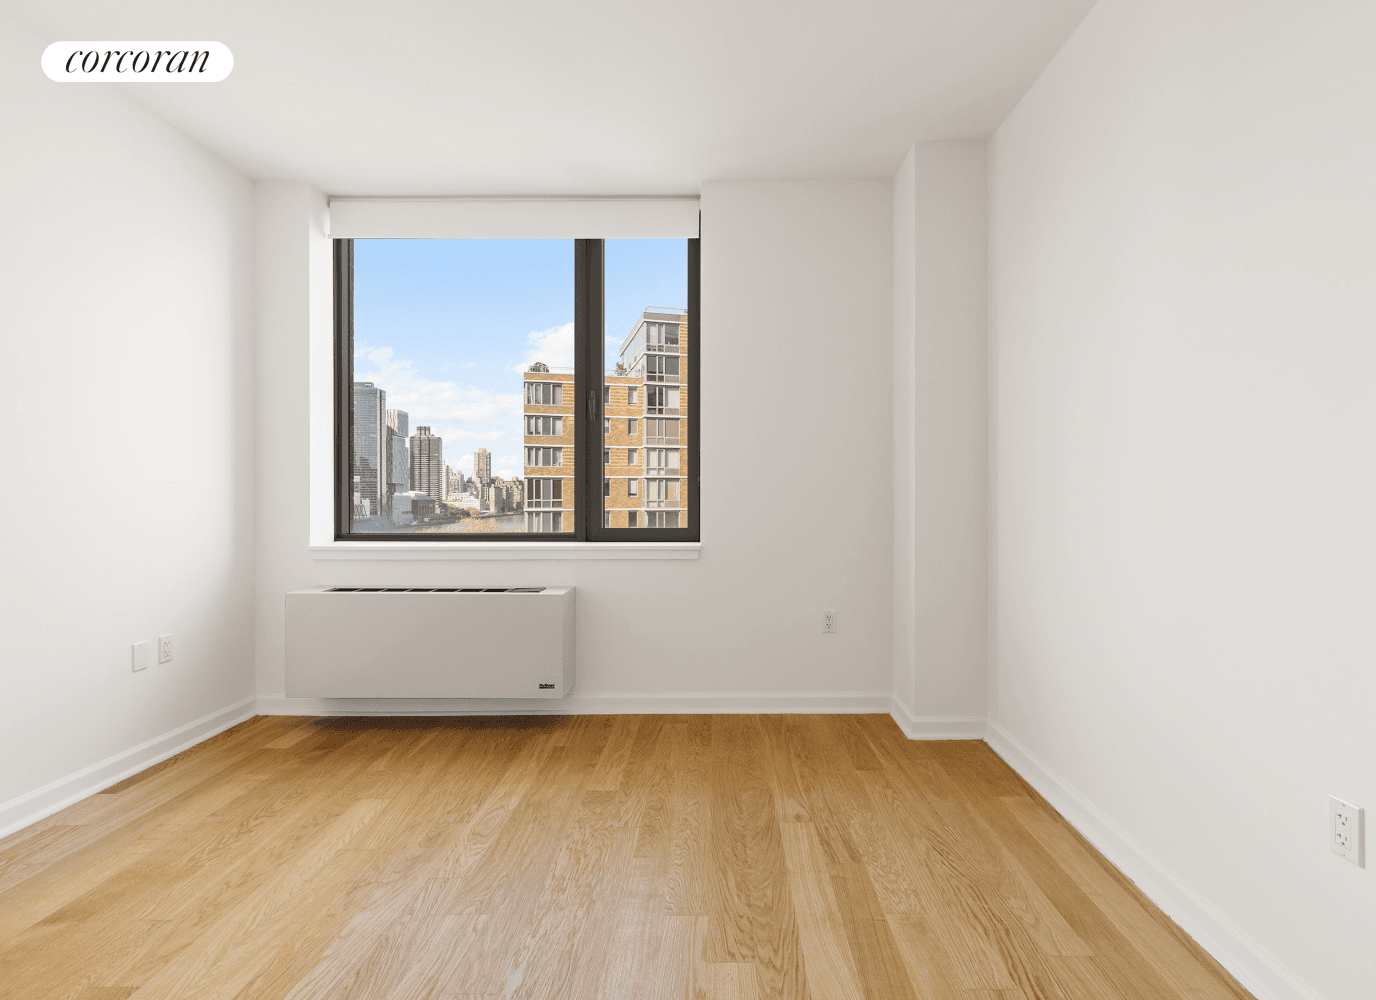 Welcome to 425 Main Street, 14A, a bright and airy one bedroom apartment offering stunning north and northwest views of the iconic Manhattan skyline.